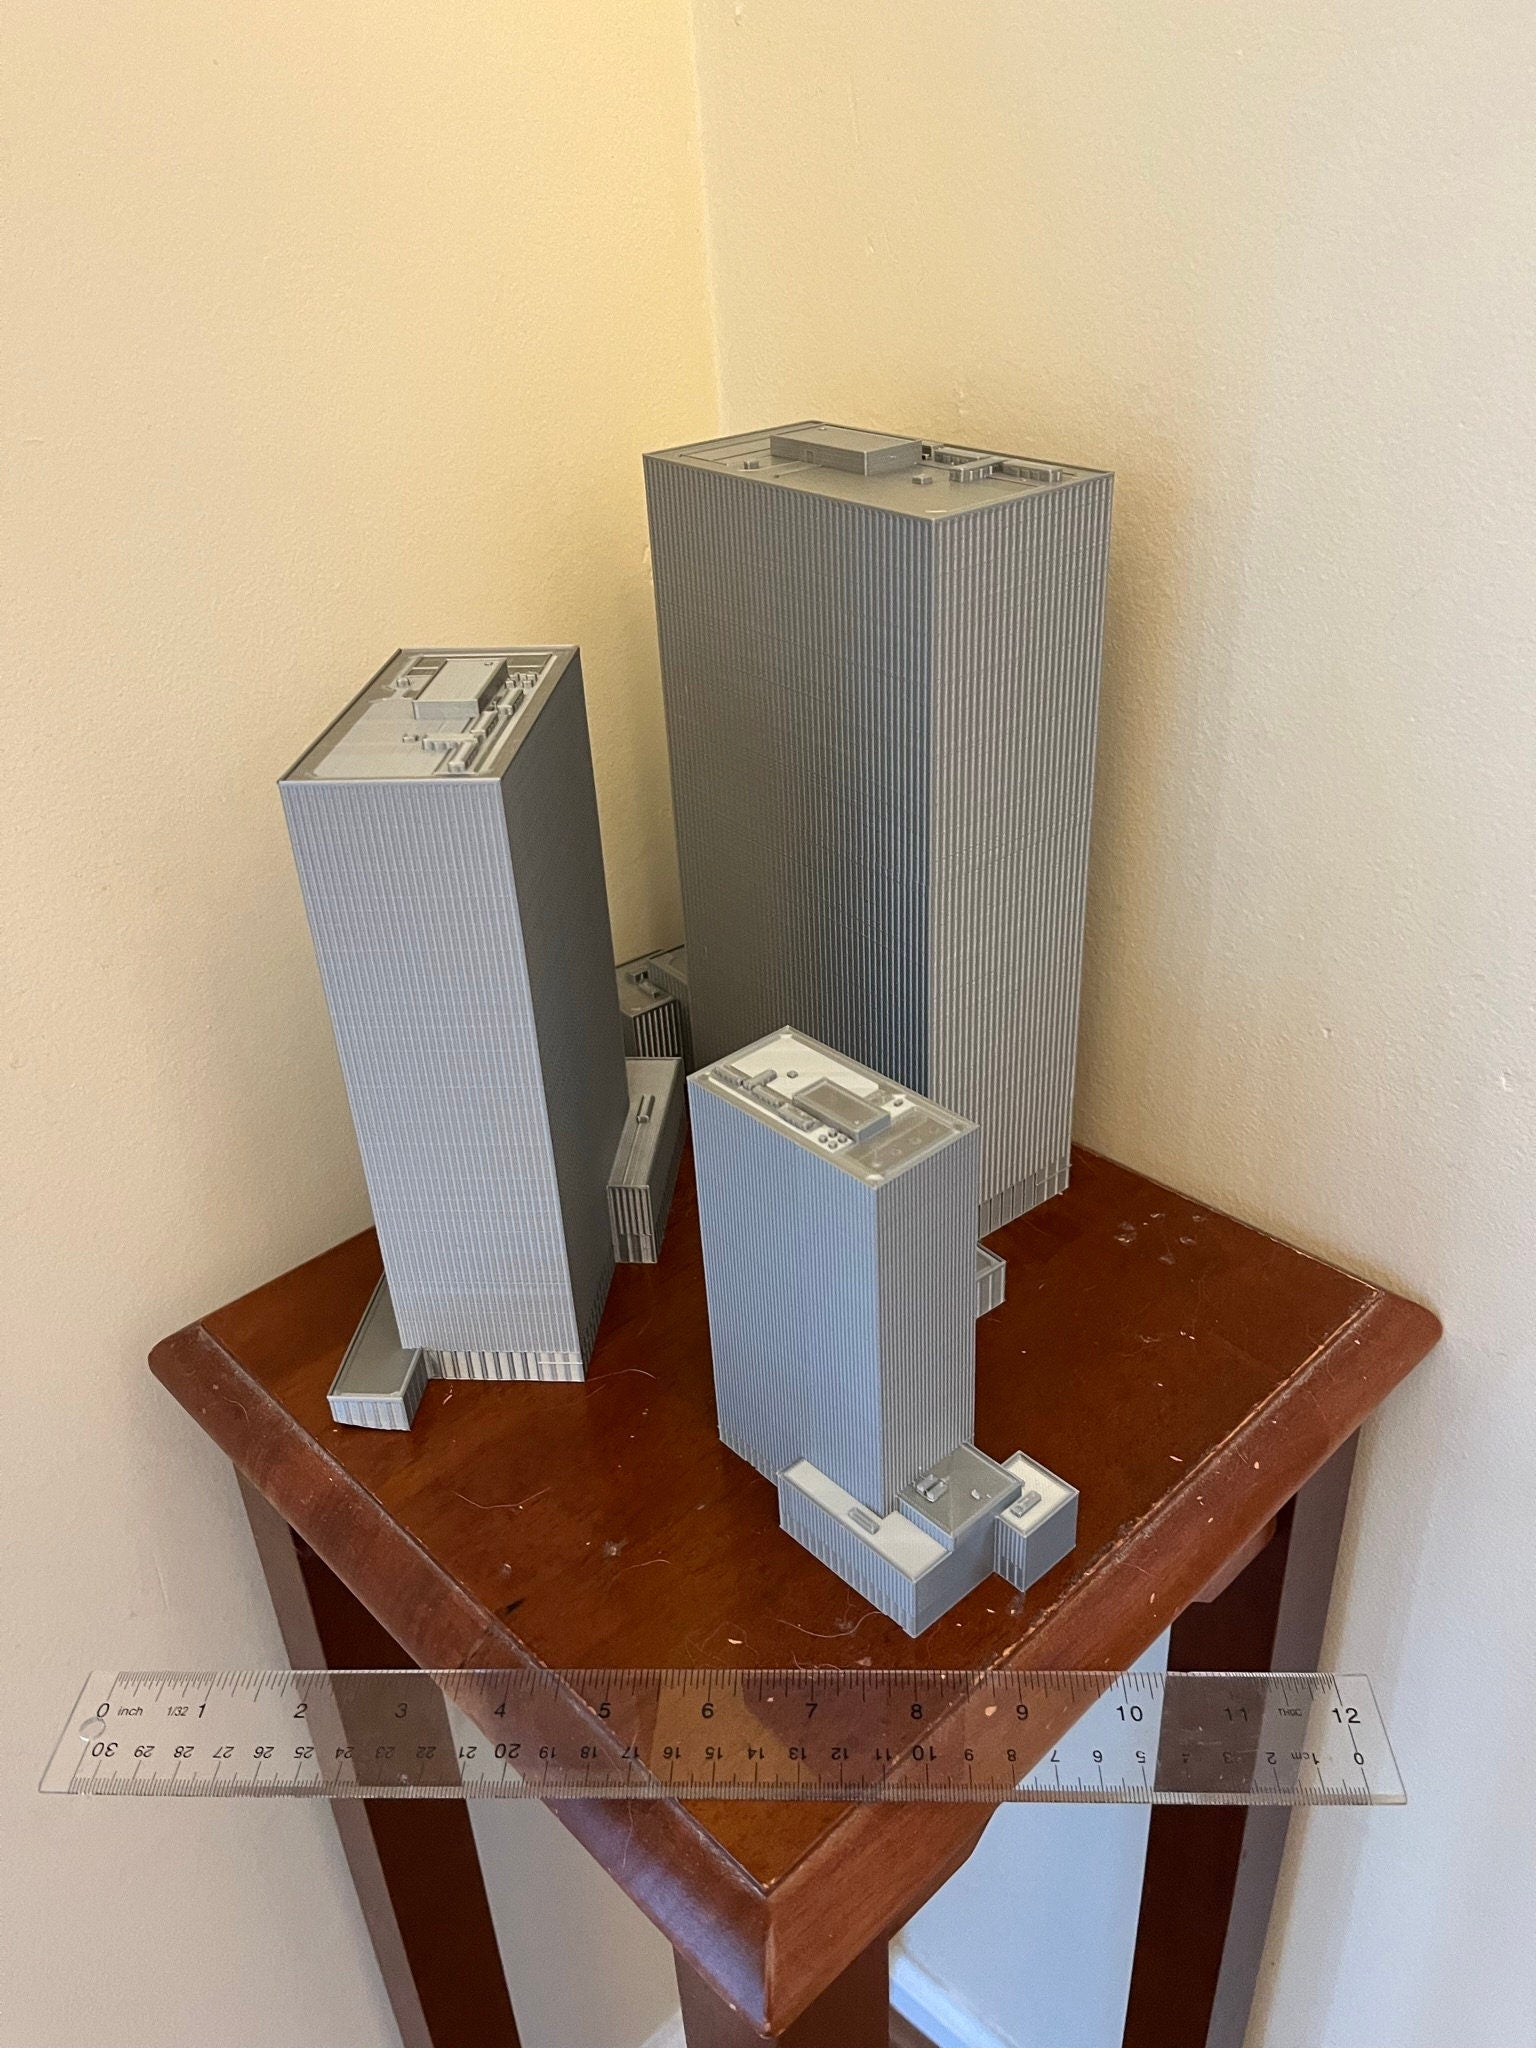 1211 Avenue of the Americas Model- 3D Printed